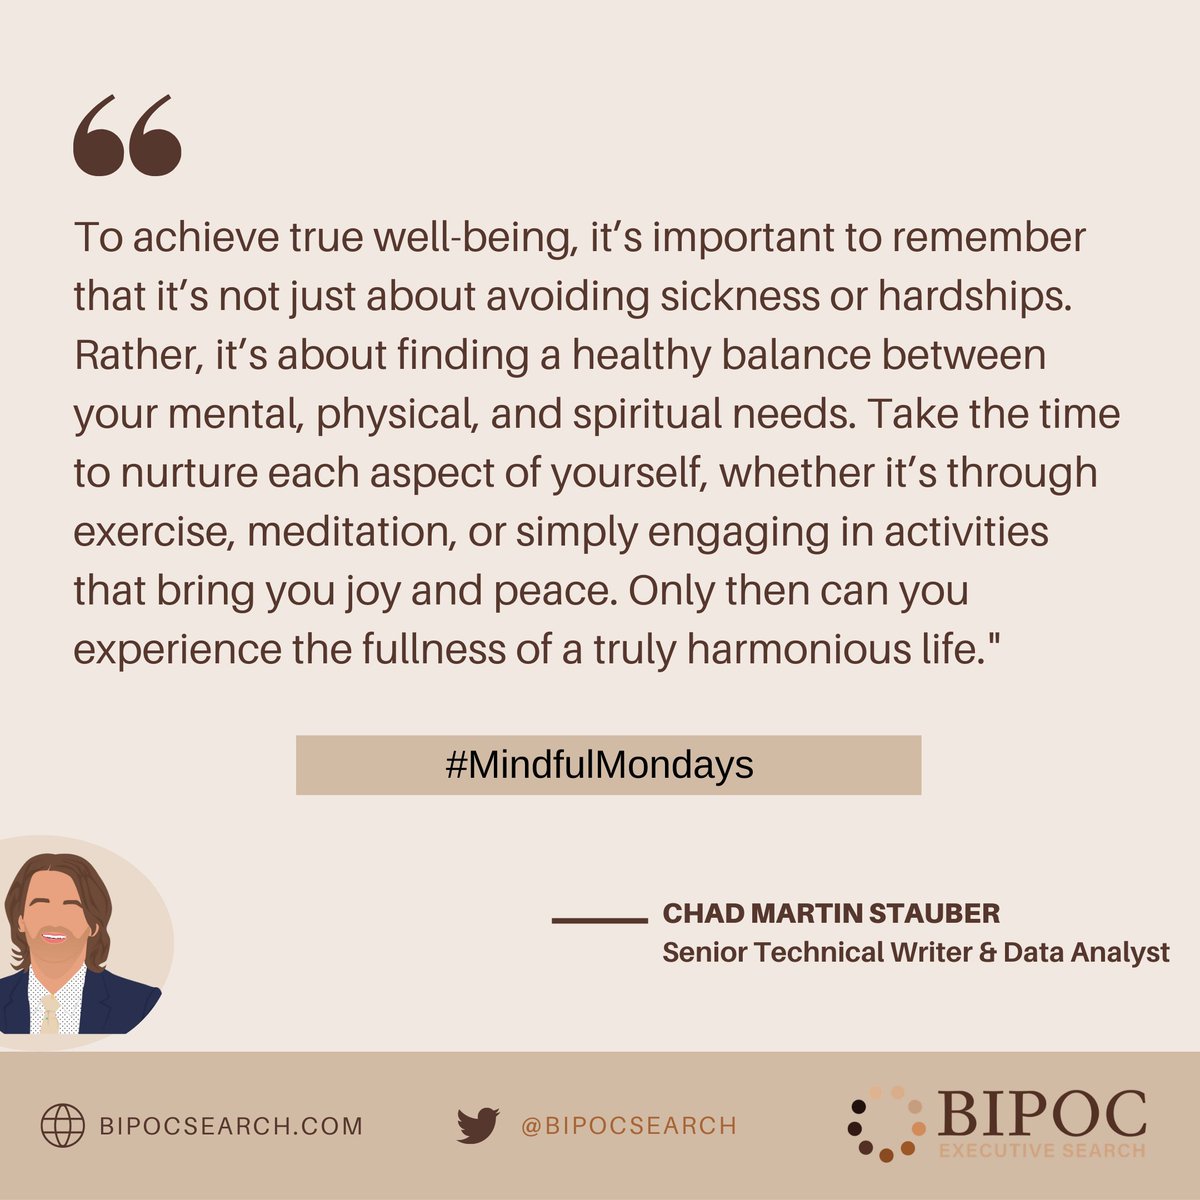 Our Senior Technical Writer & Data Analyst, Chad Martin Stauber, shares his thoughts on experiencing a harmonious life!

#MindfulMondays #MindfulQuote #ExperiencesThatMatter #ConversationStarters #Mindfulness #BipocExecutiveSearch #ChadMartinStauber